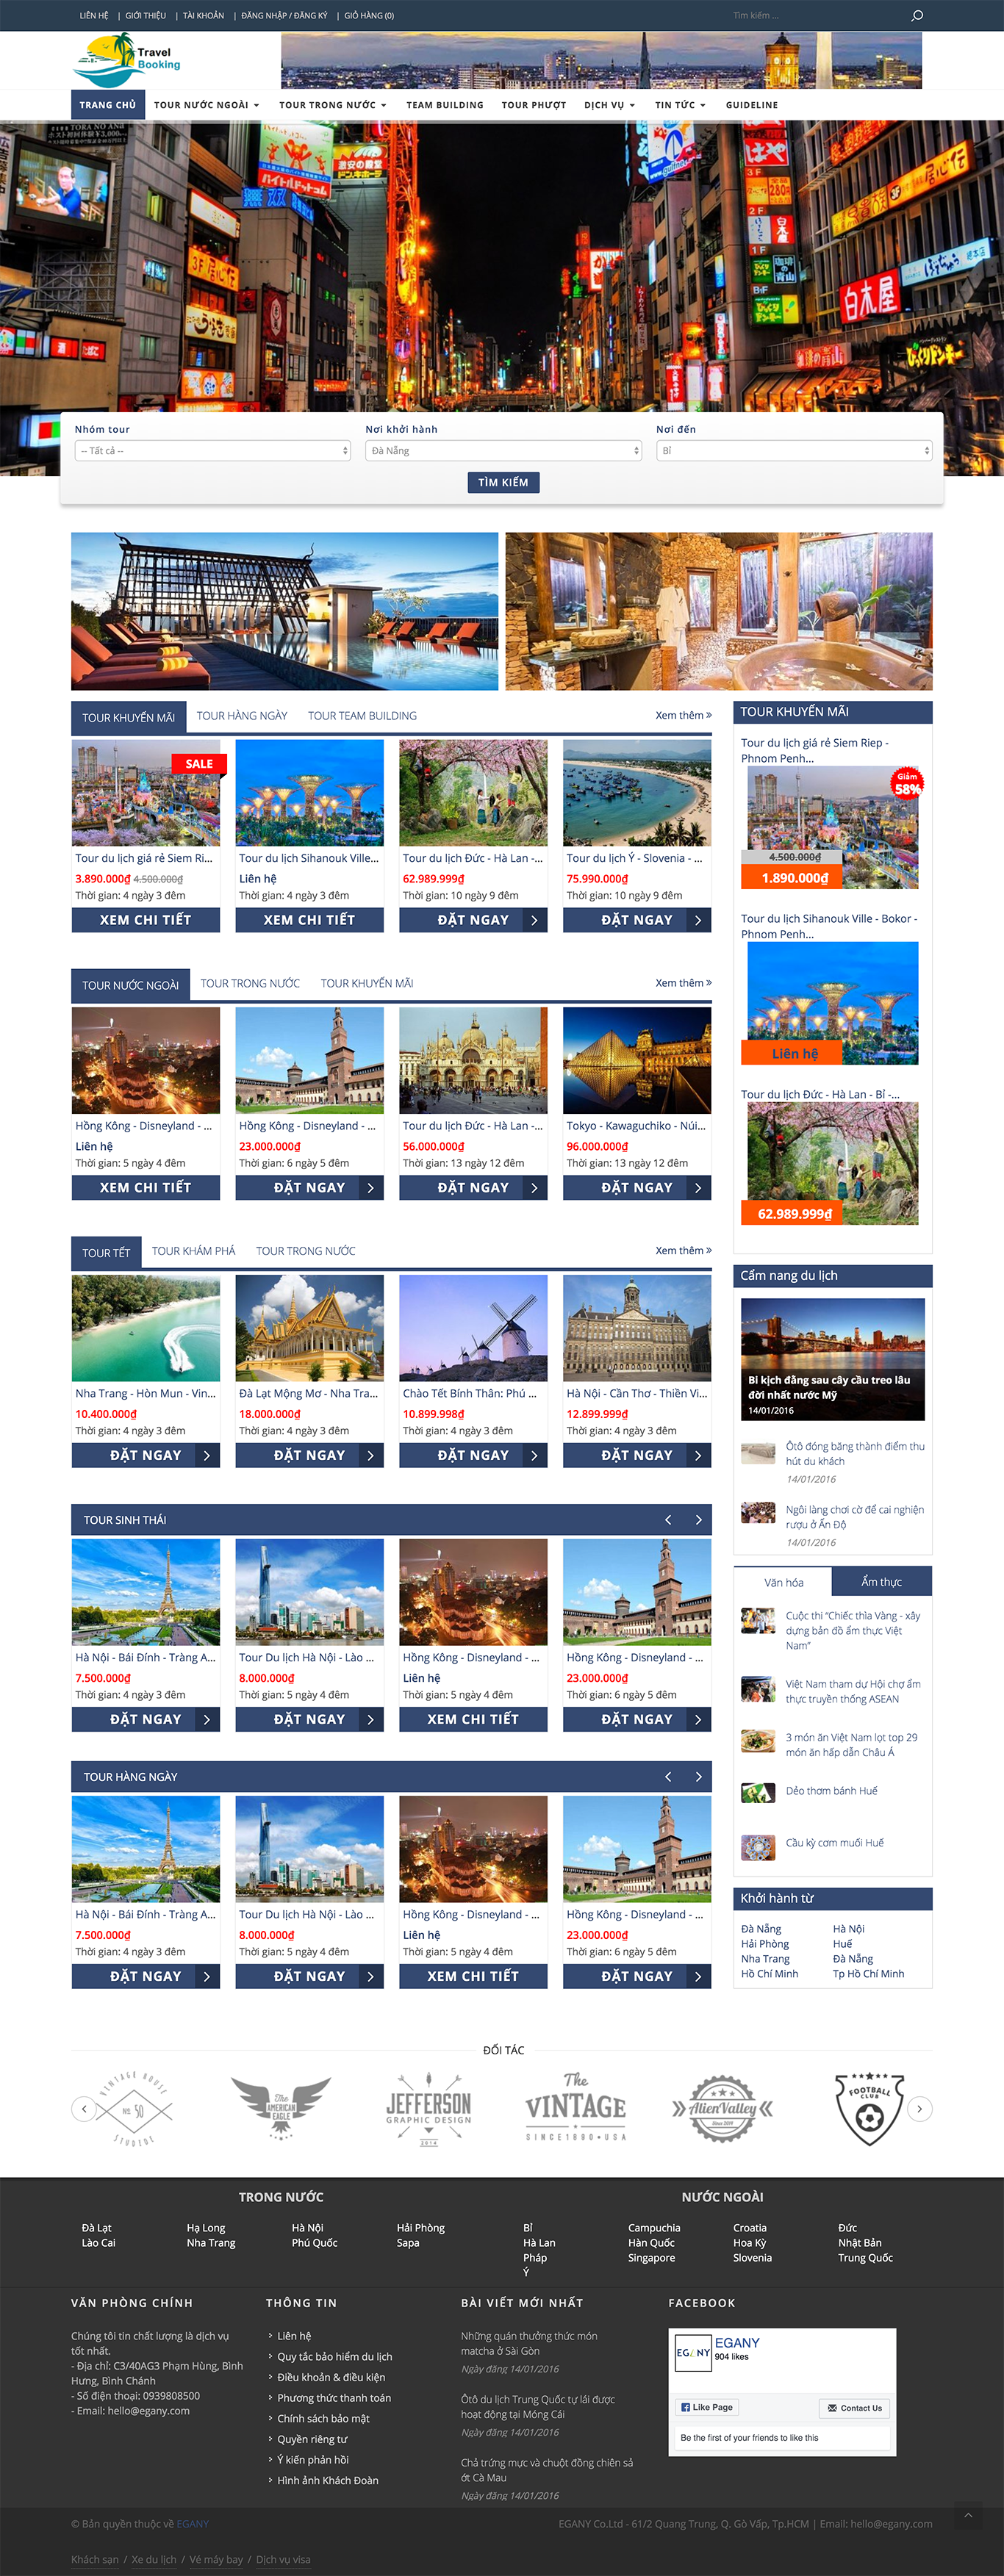 Travel booking